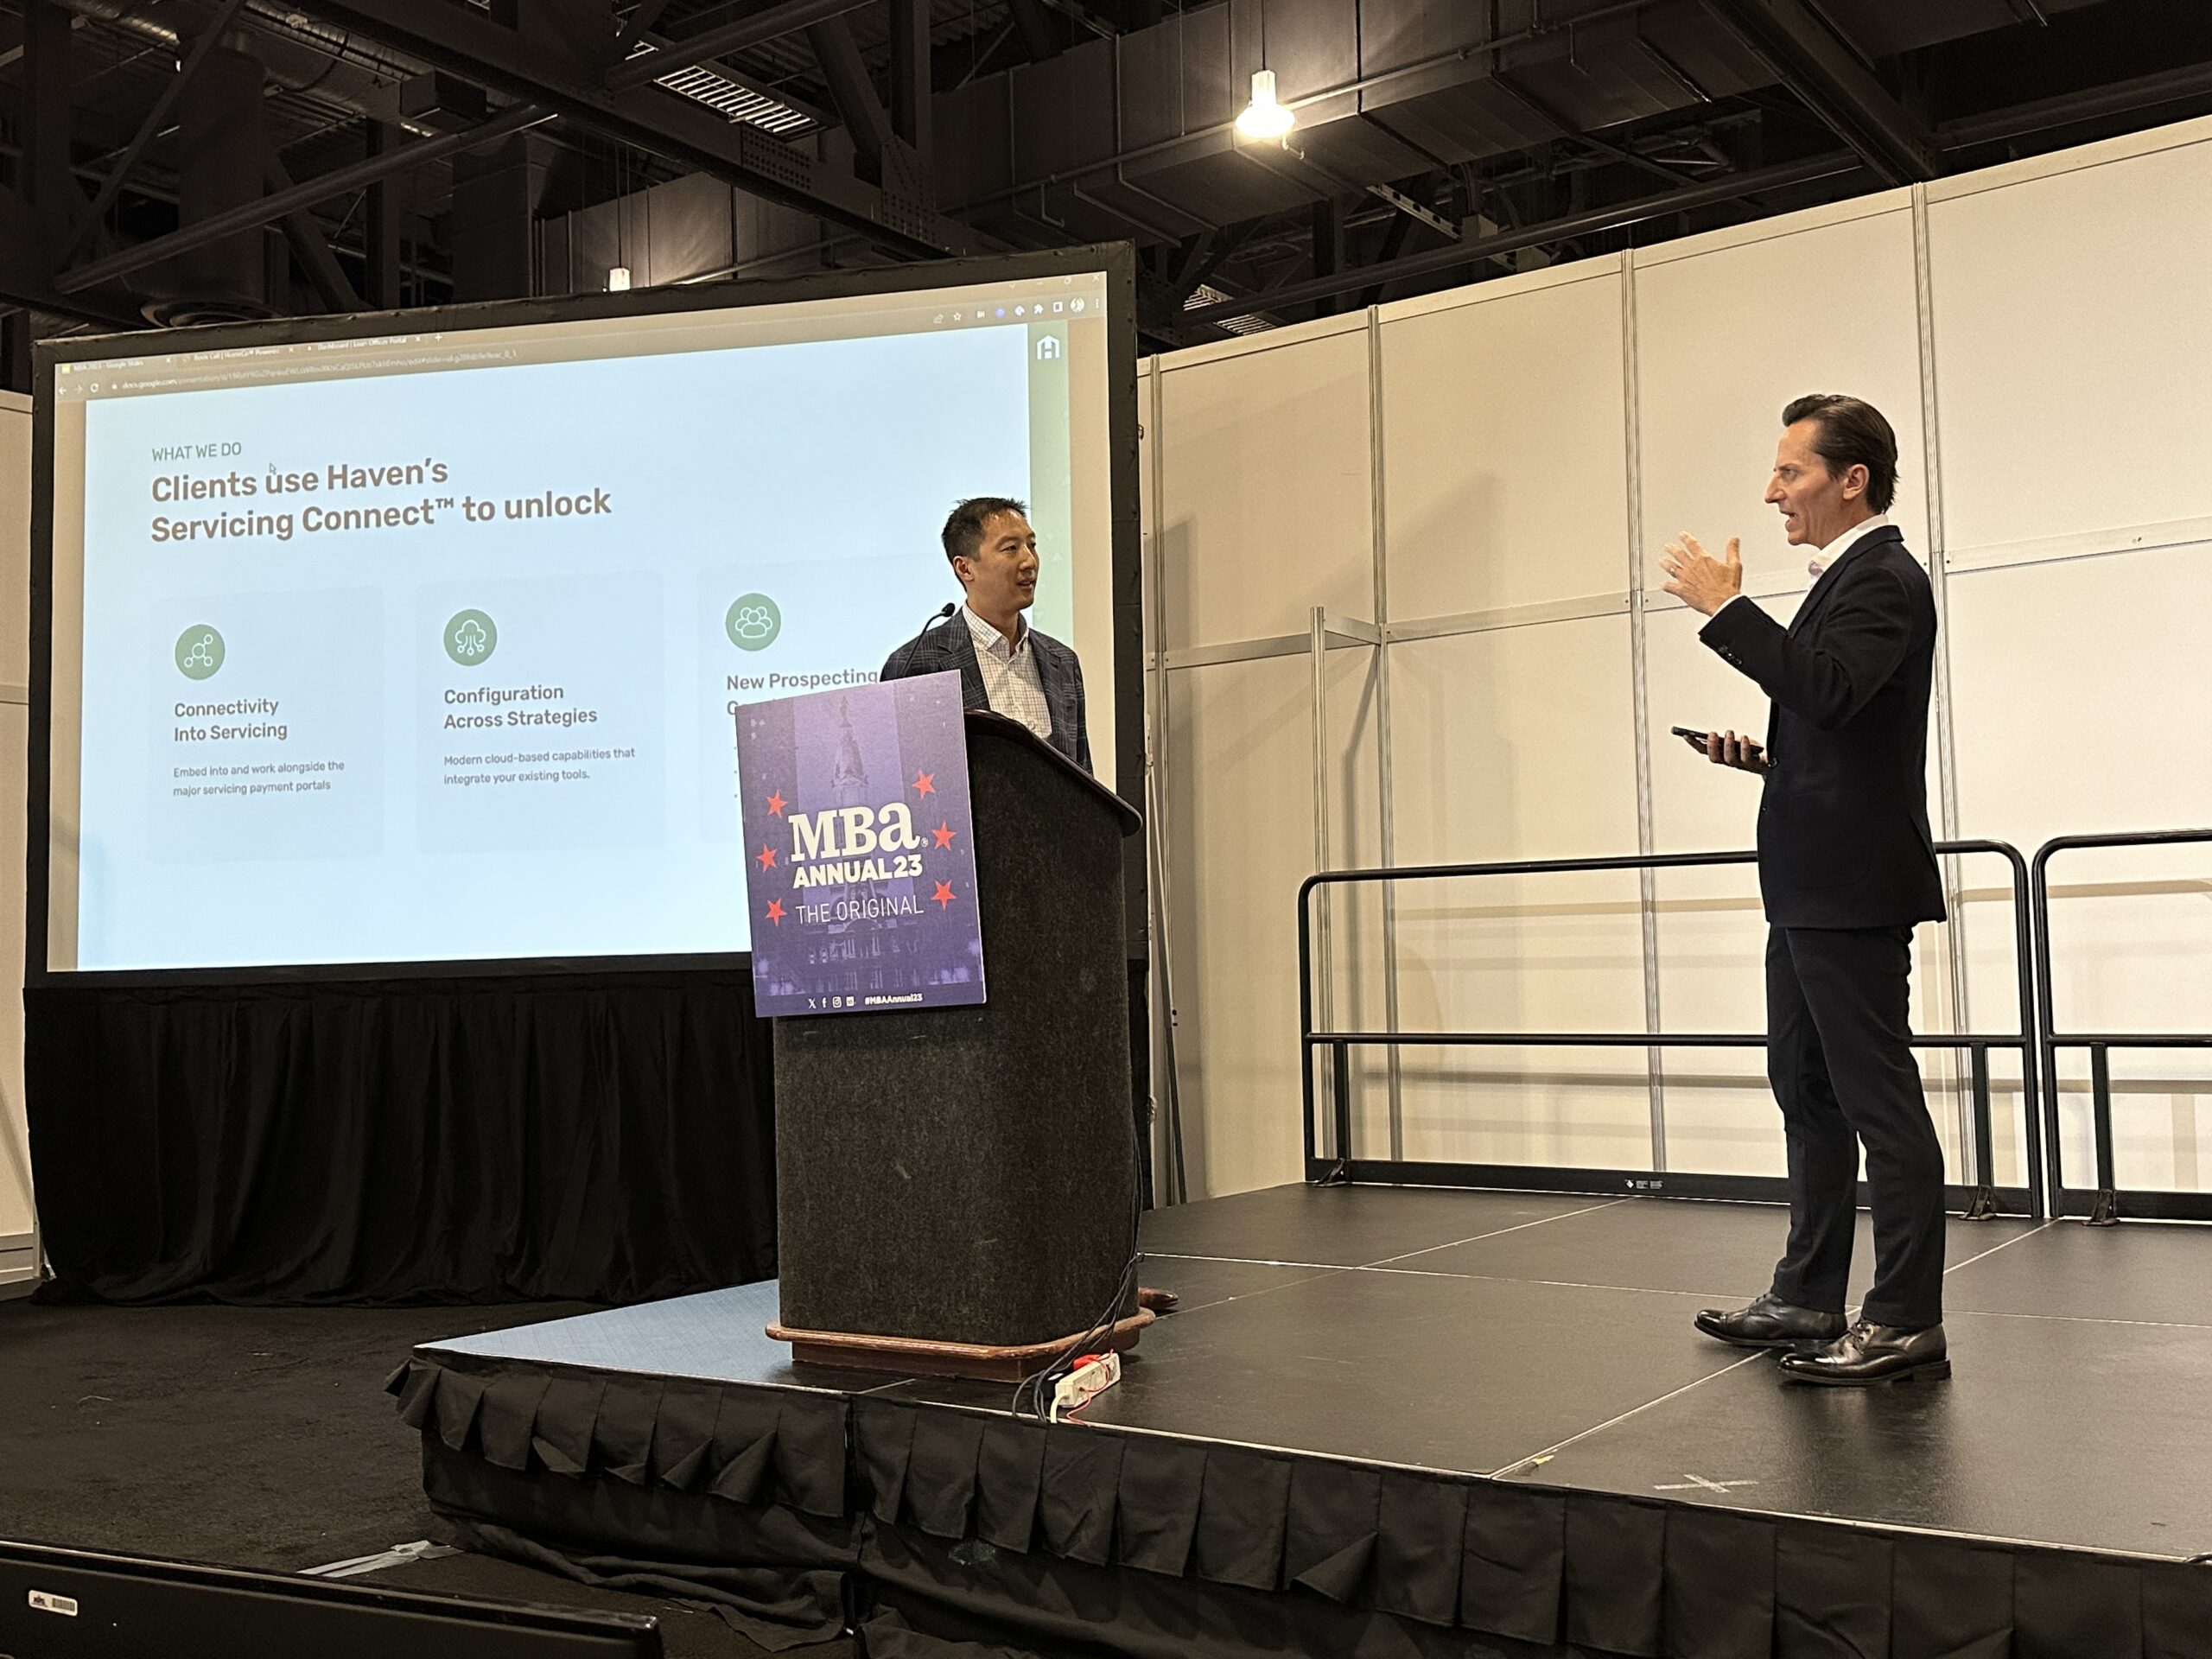 Julian Hebron On-Stage Feedback for Haven Jonathan Chao at Mortgage Technology Showcase, MBA Annual 2023 - The Basis Point